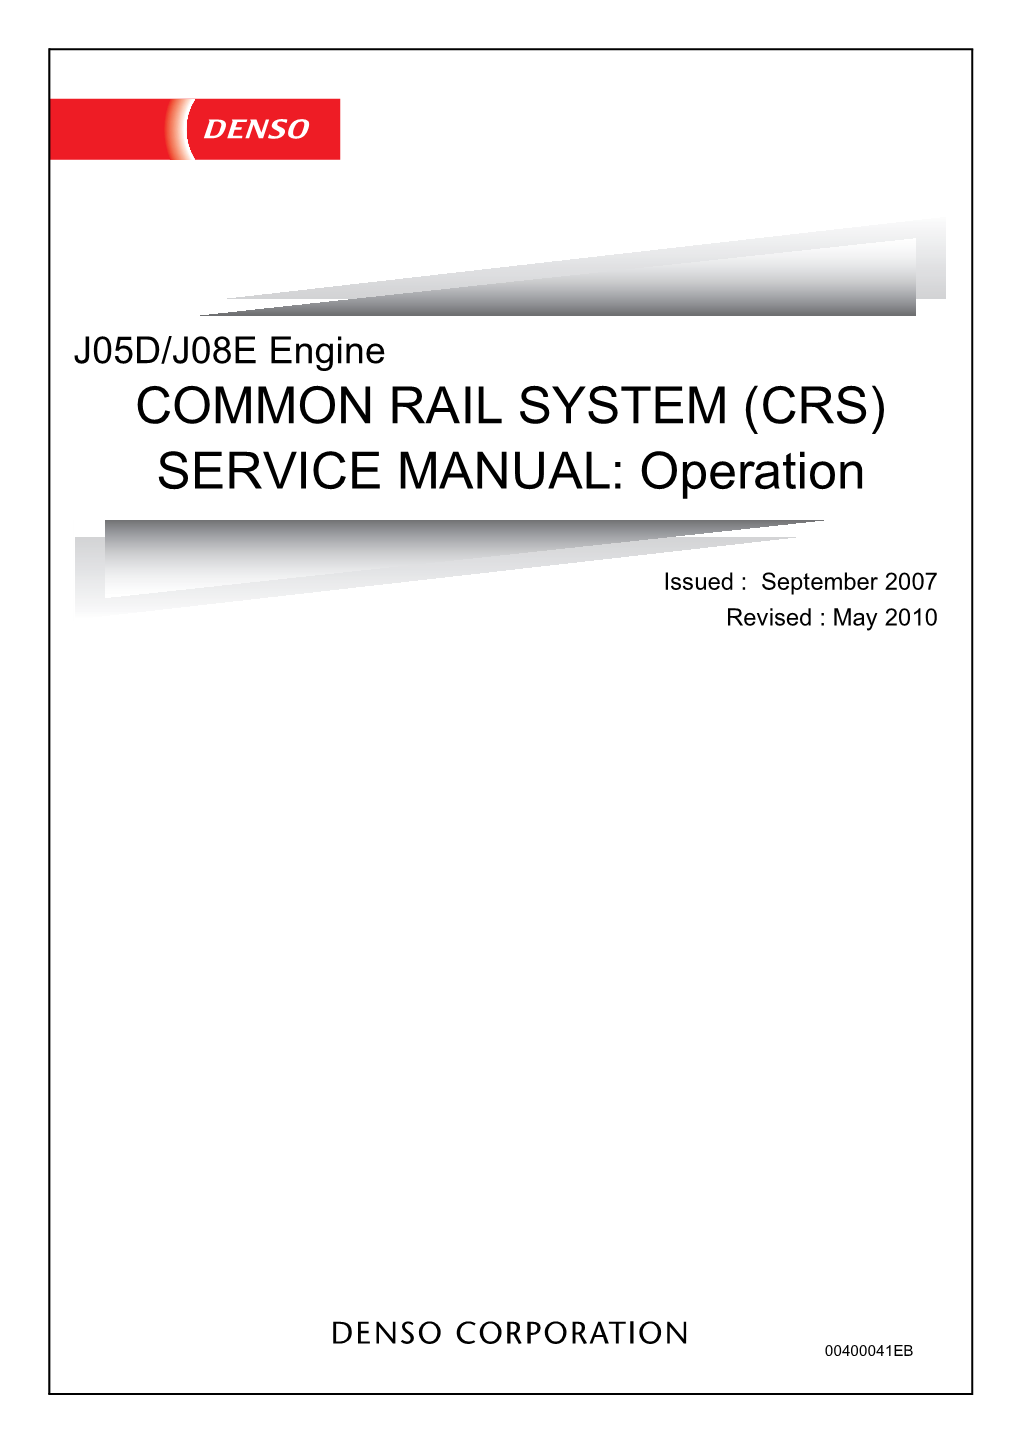 COMMON RAIL SYSTEM (CRS) SERVICE MANUAL: Operation